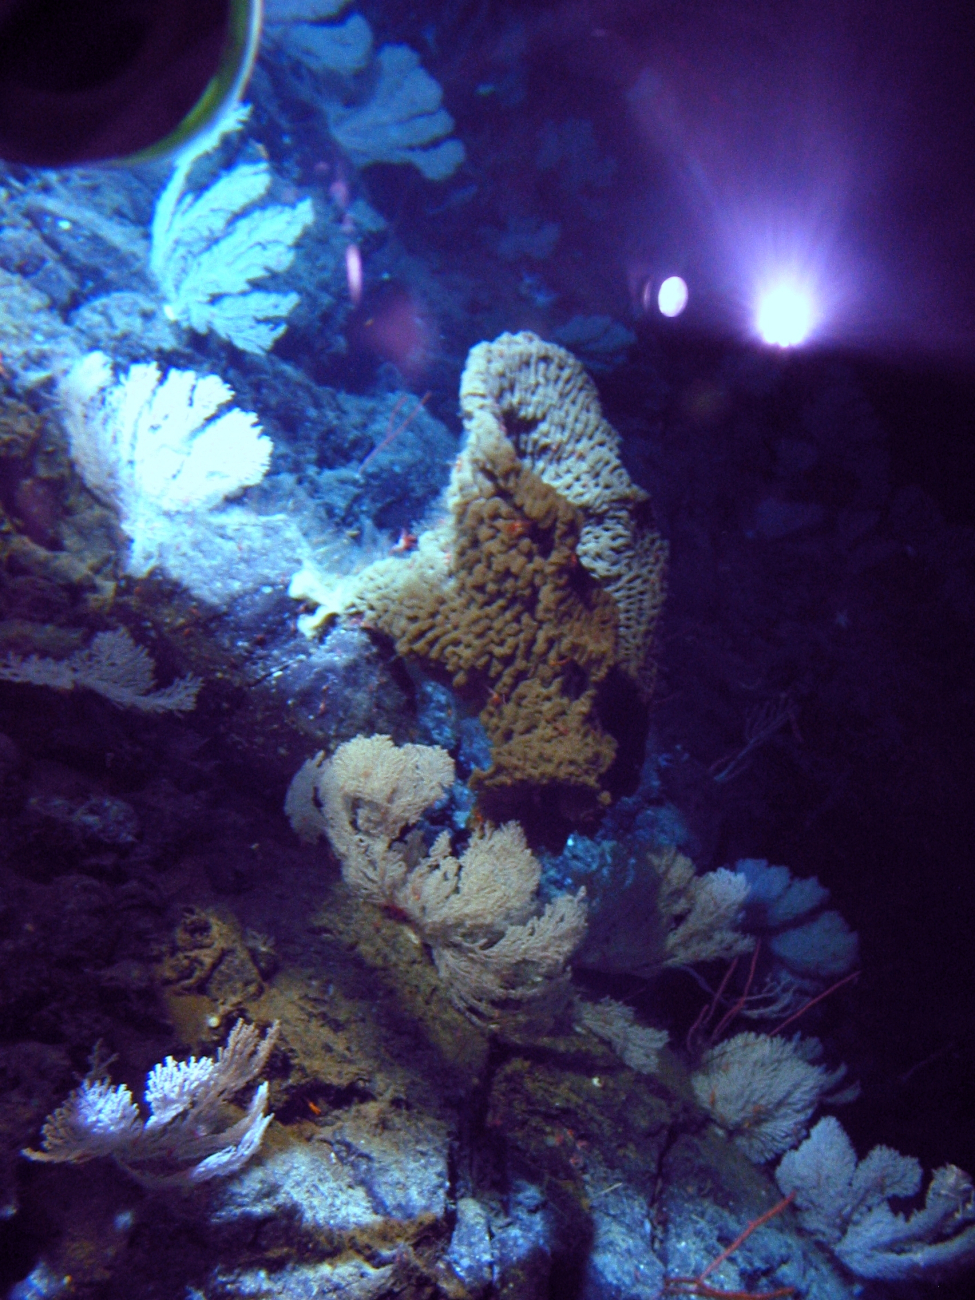 Large sponges and primnoid corals seen on the side of a seamount